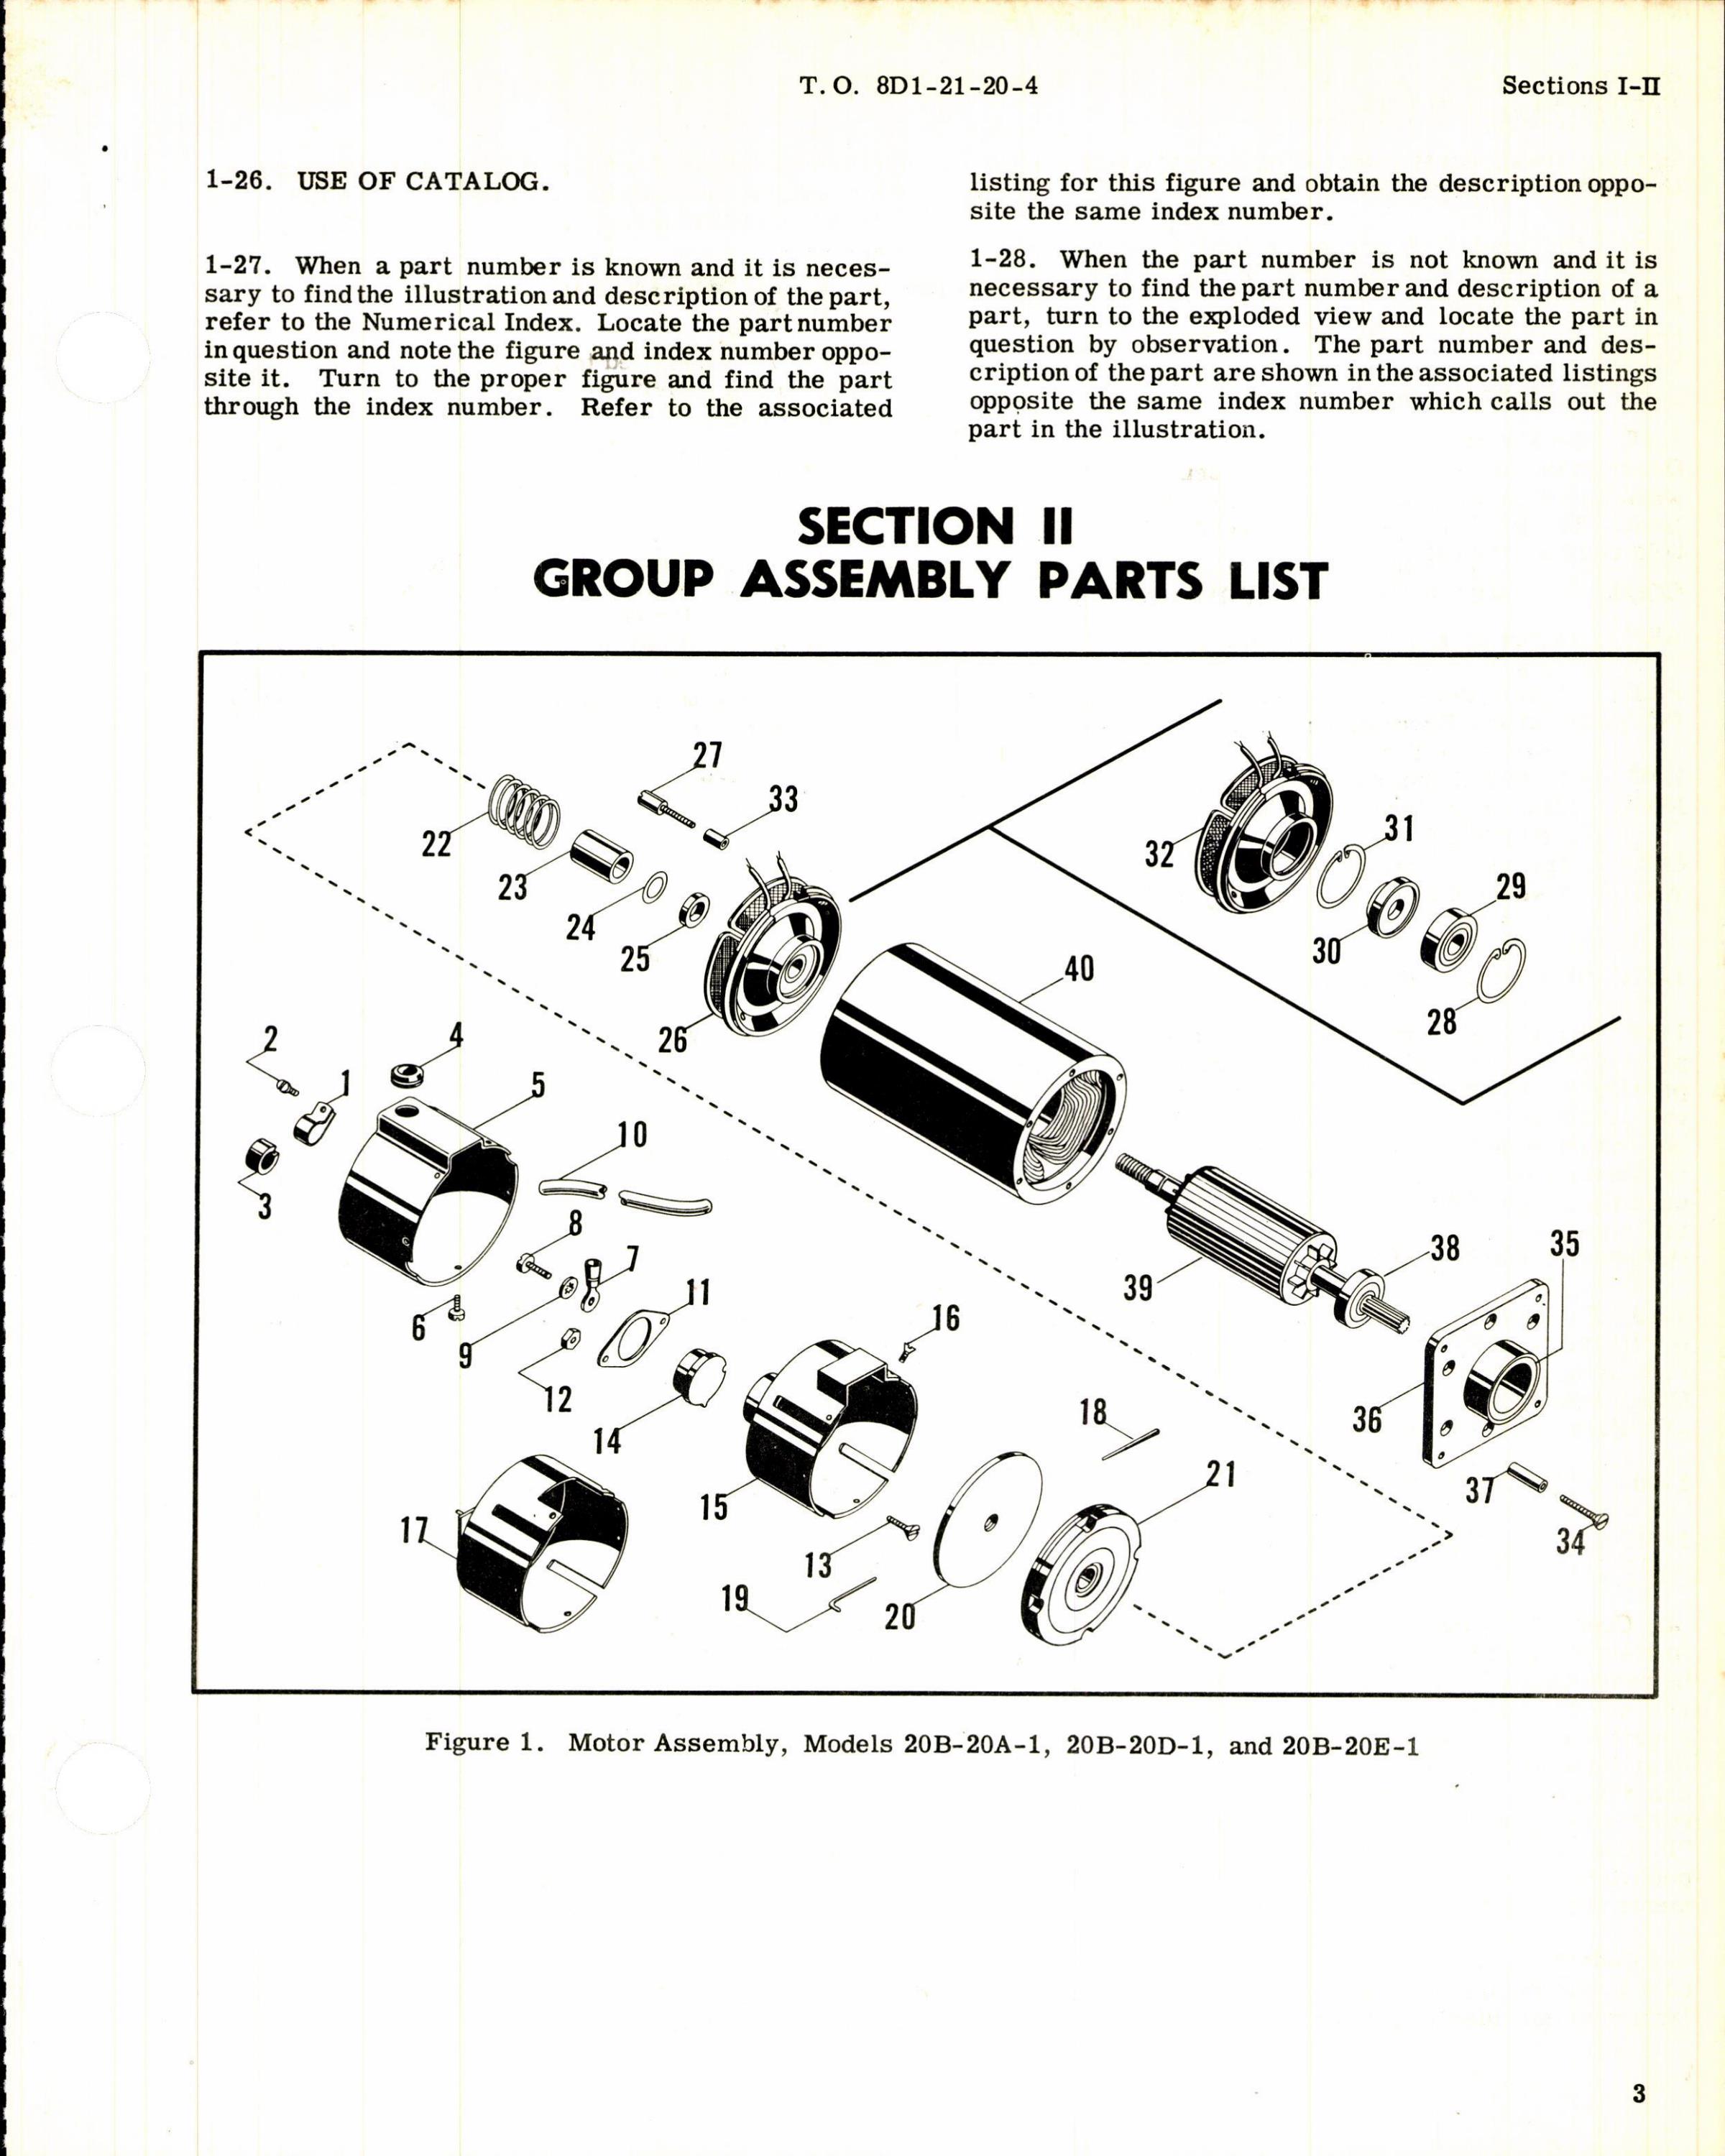 Sample page 5 from AirCorps Library document: Illustrated Parts Breakdown for Lear 